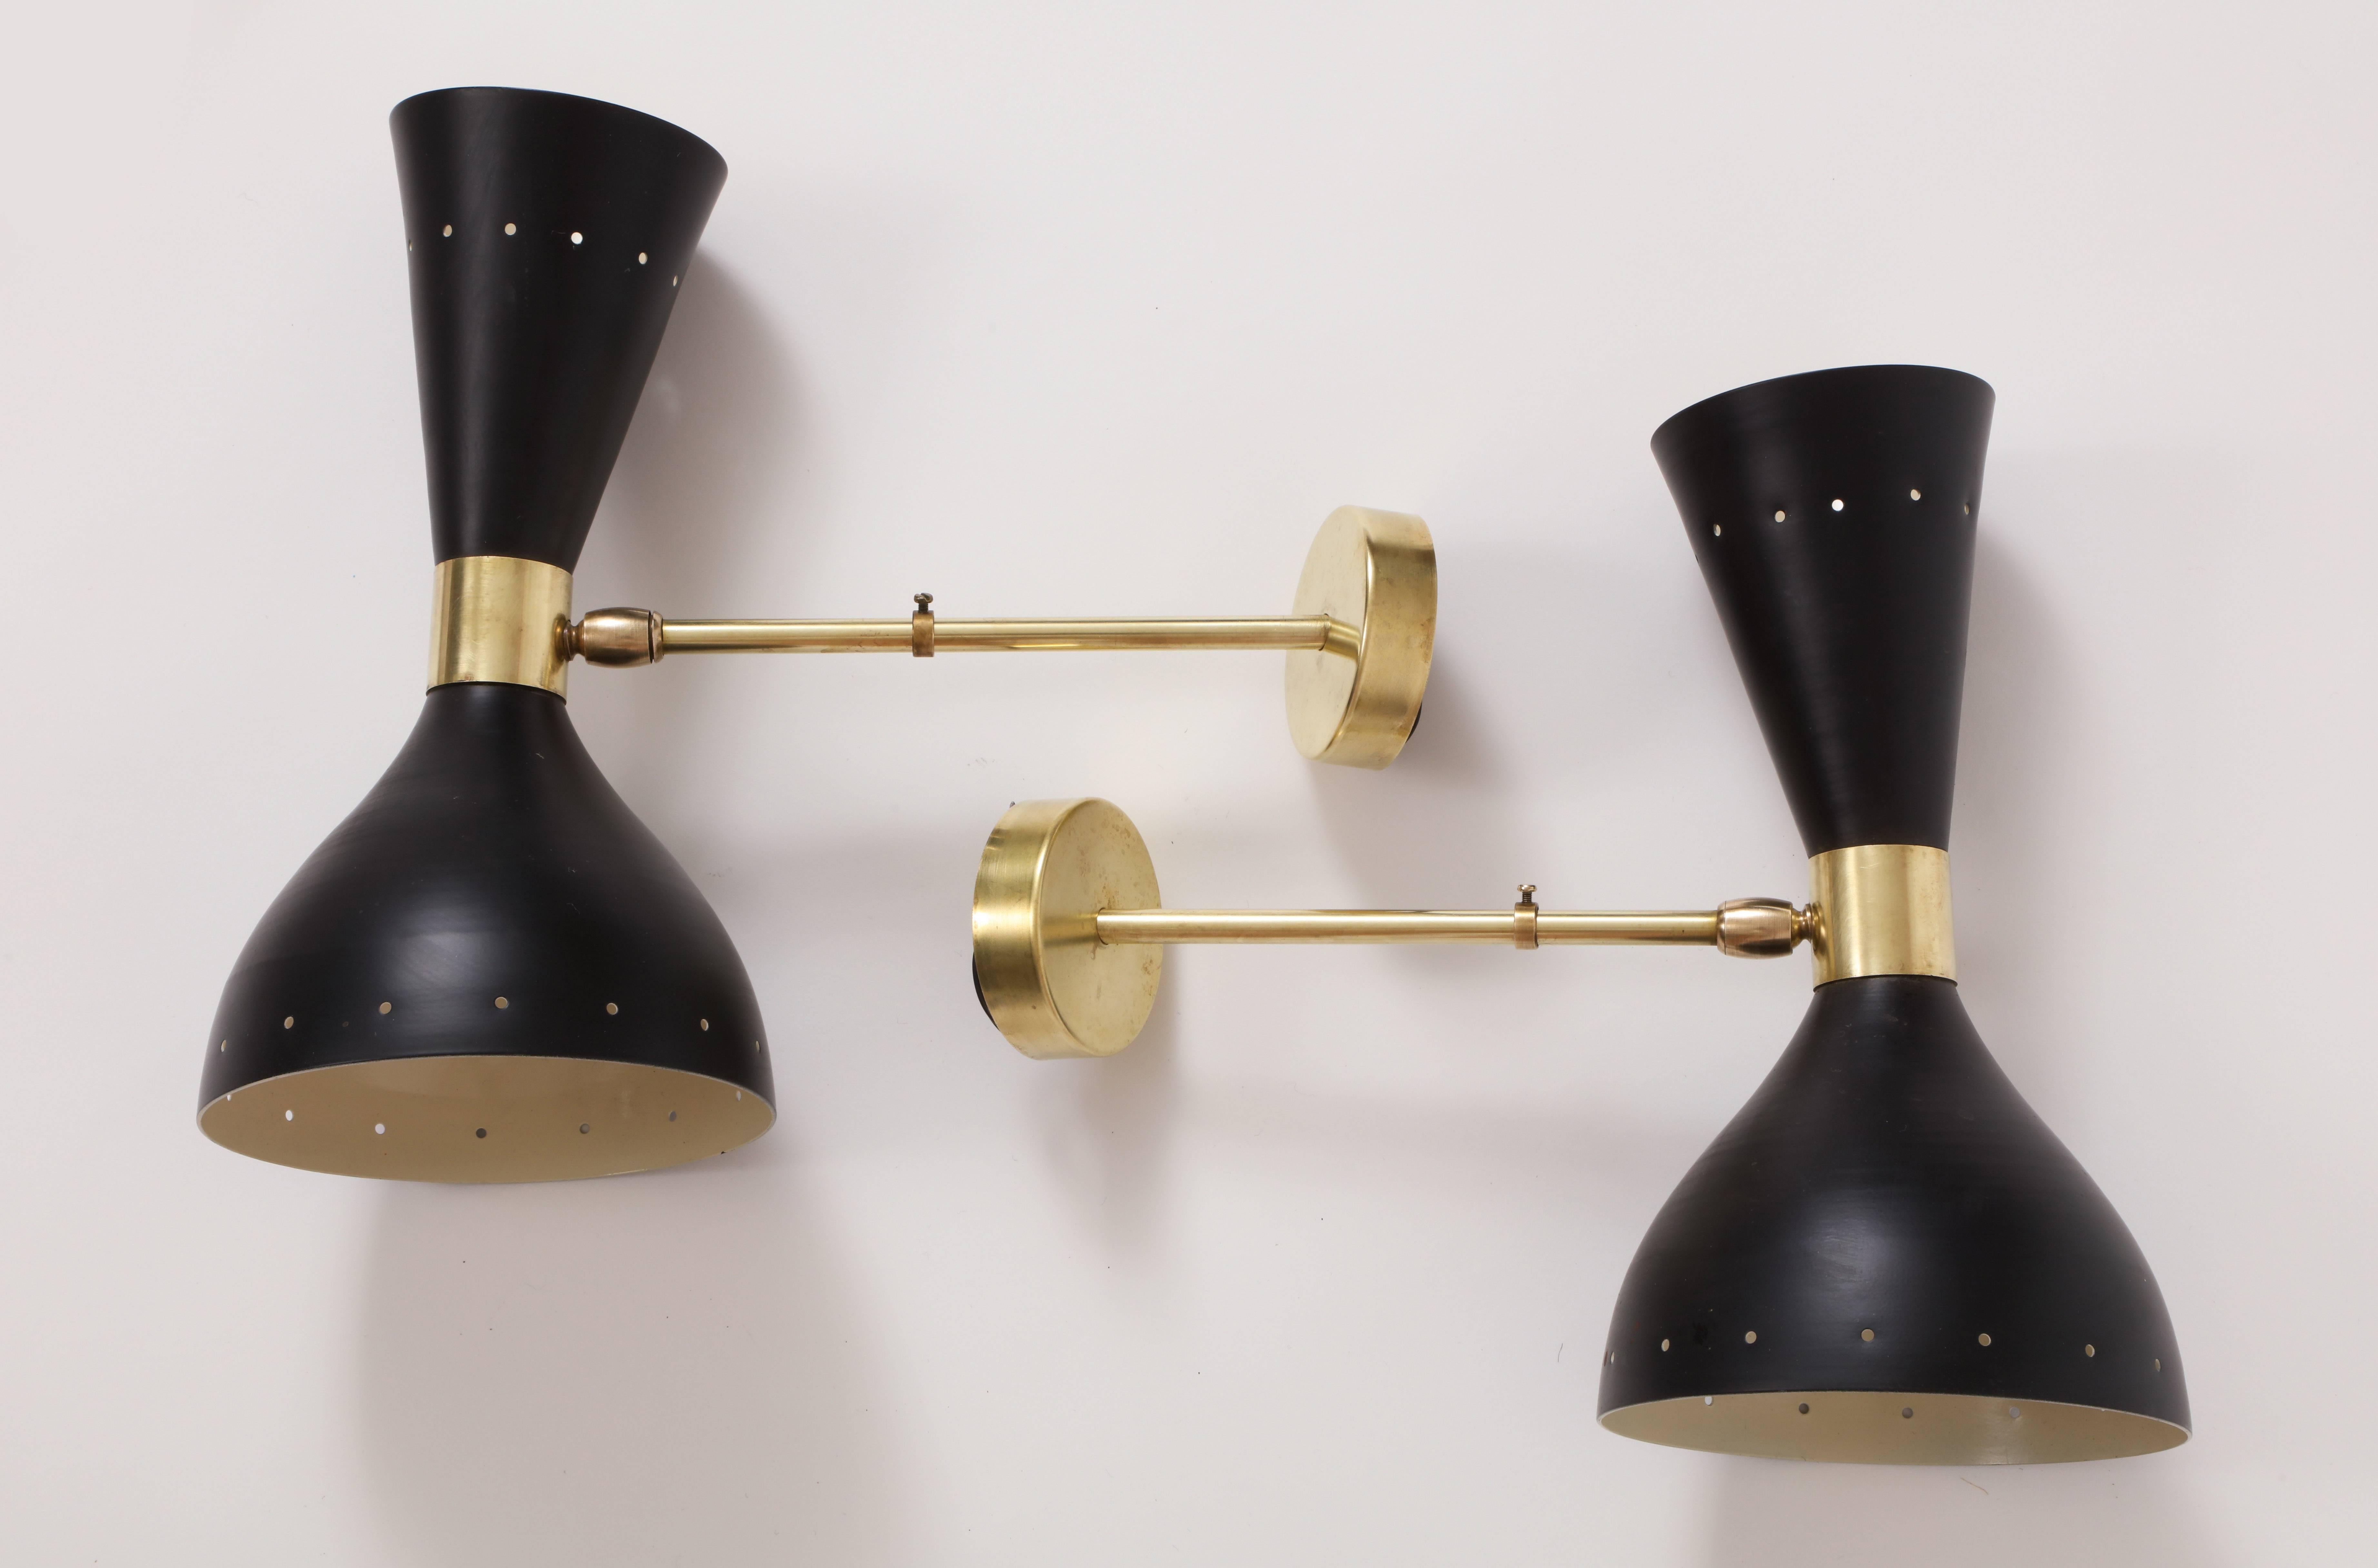 Stilnovo style Diablo brass black Mid-Century Italian wall light sconces, 1950.

Beautiful Stilnovo style black and brass sconces.
Lovely patina on the brass,
In great overall condition.

Height: 11.2.
Deep: 6 inches.
Width: 12 inches.